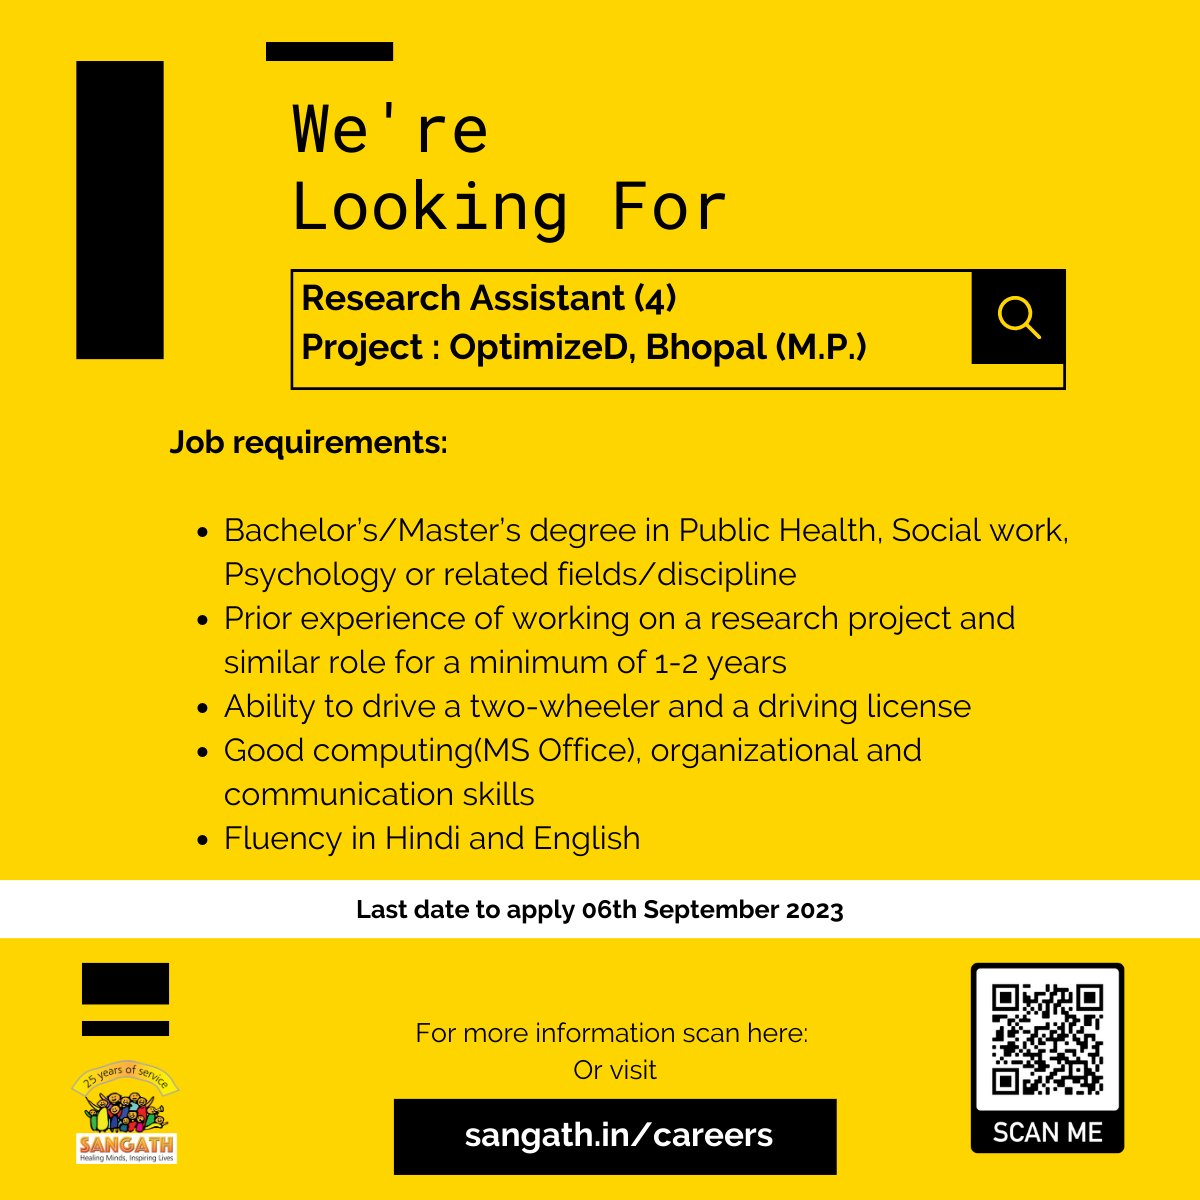 We are looking for Research Assistants for our OptimizeD Project.
Location: Bhopal, Madhya Pradesh
Position : 04
Apply before 06th September 2023, through google link bit.ly/OptimiseDRA
For details, visit sangath.in/careers/

#hiringnow #hiringimmediately #bhopal #jobs